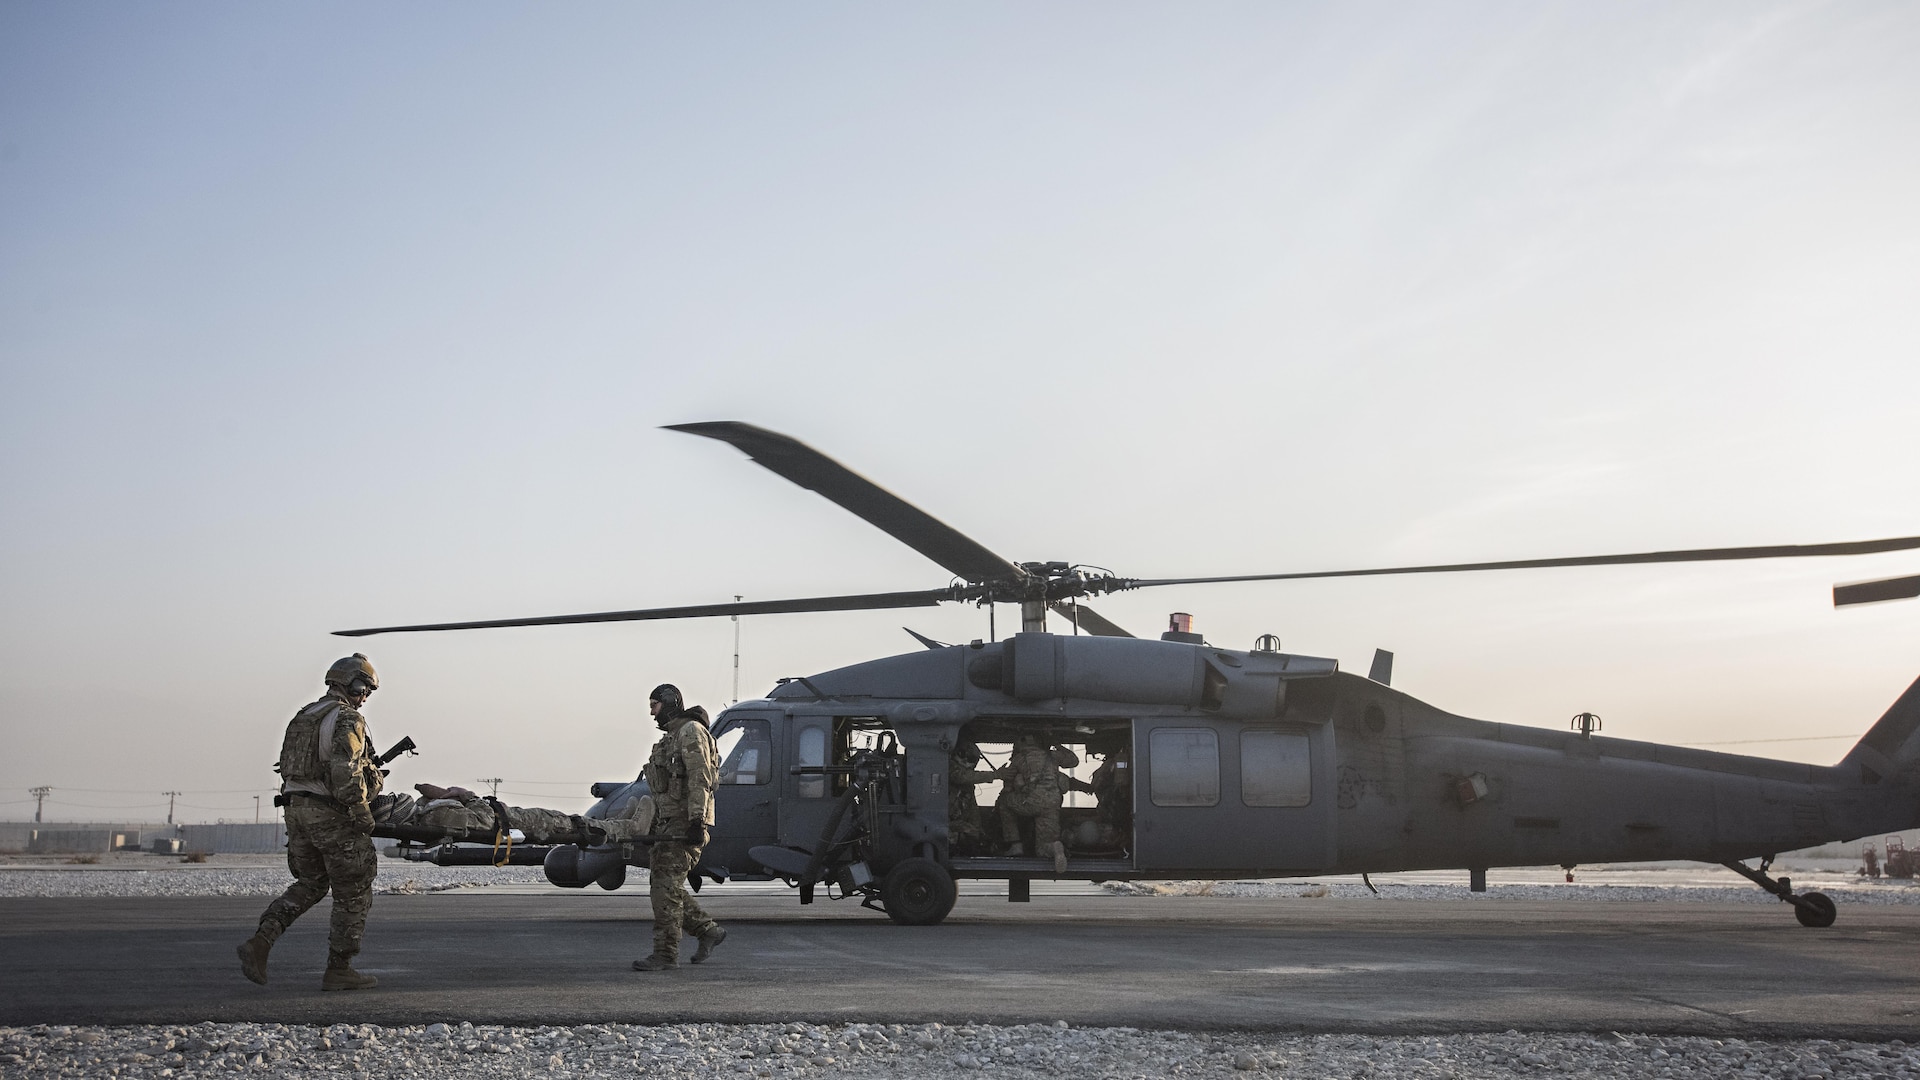 Senior Airman Tammer Barkouki, 83rd Expeditionary Rescue Squadron pararescuman, and Maj. David Depiazza, 83rd ERQS combat rescue officer, carry a patient by litter onto an HH-60 Pave Hawk helicopter for evacuation during a mass casualty exercise held Nov. 17, 2016 at Bagram Airfield, Afghanistan. Training scenarios are based on real-world situations that have been encountered in past operations. (U.S. Air Force photo by Staff Sgt. Katherine Spessa)